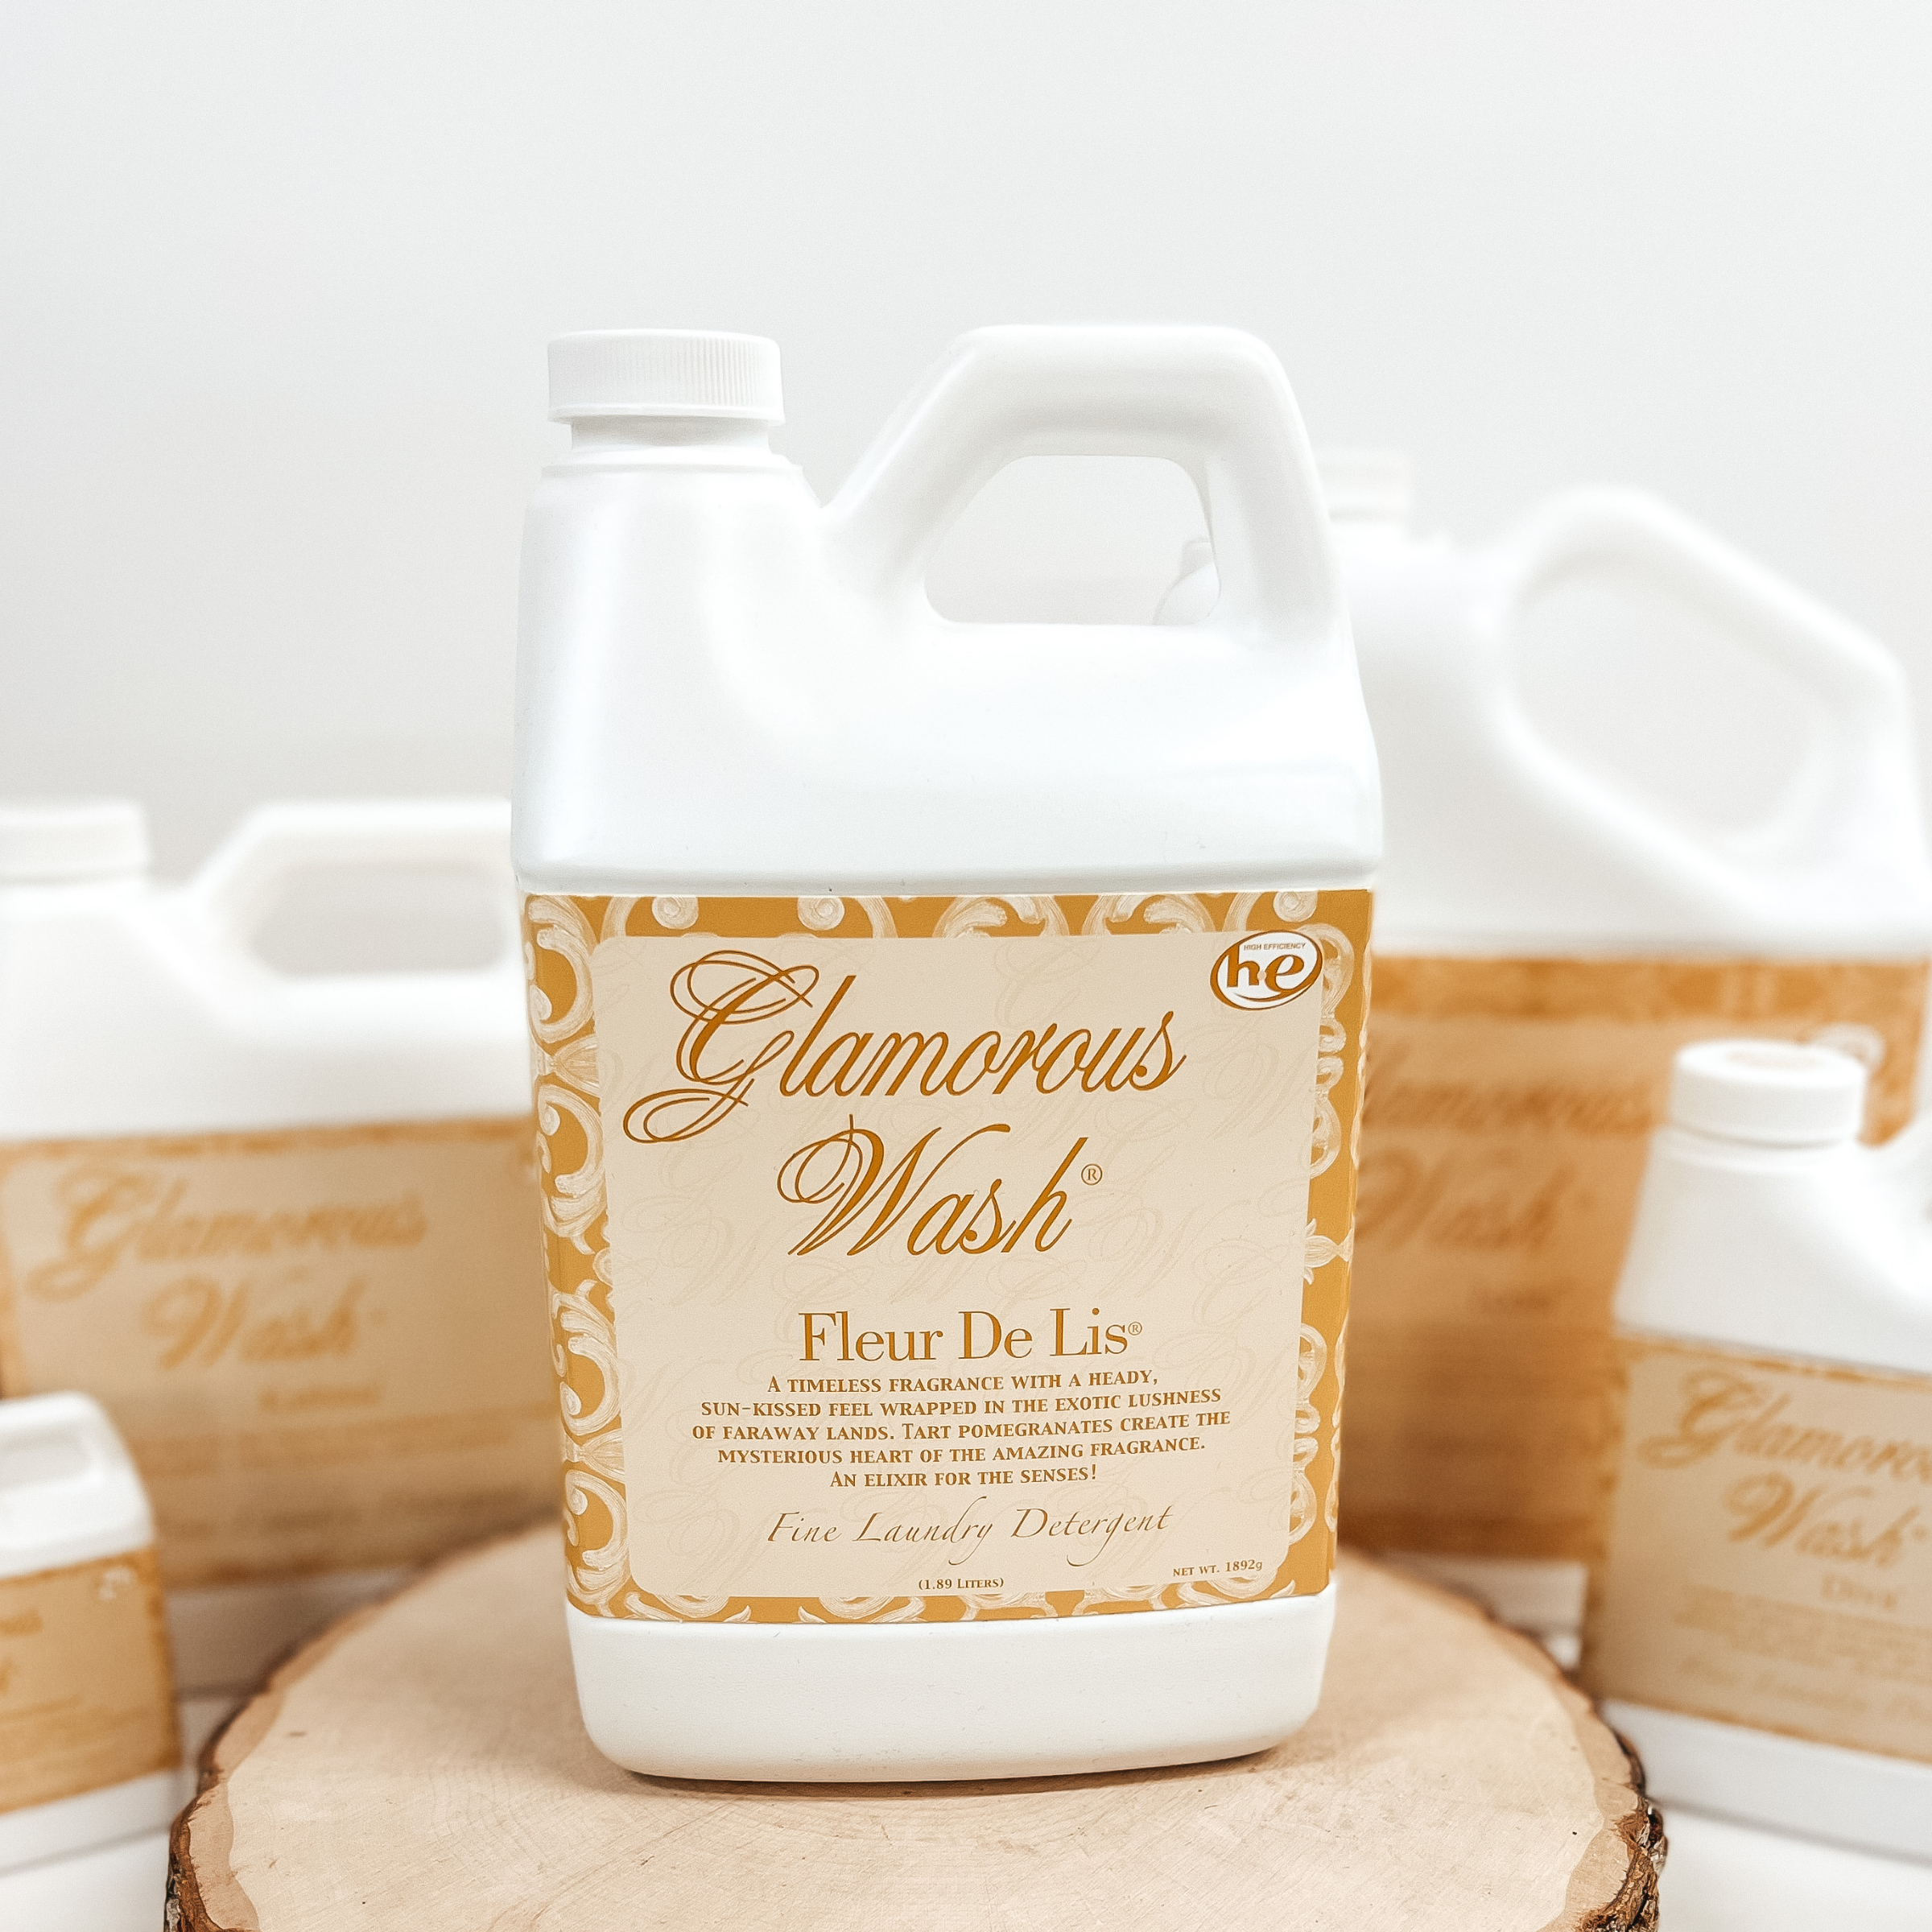 Tyler Candle Company | 1.89L (64 oz.) Glamorous Wash Fine Laundry Detergent | Various Scents - Giddy Up Glamour Boutique